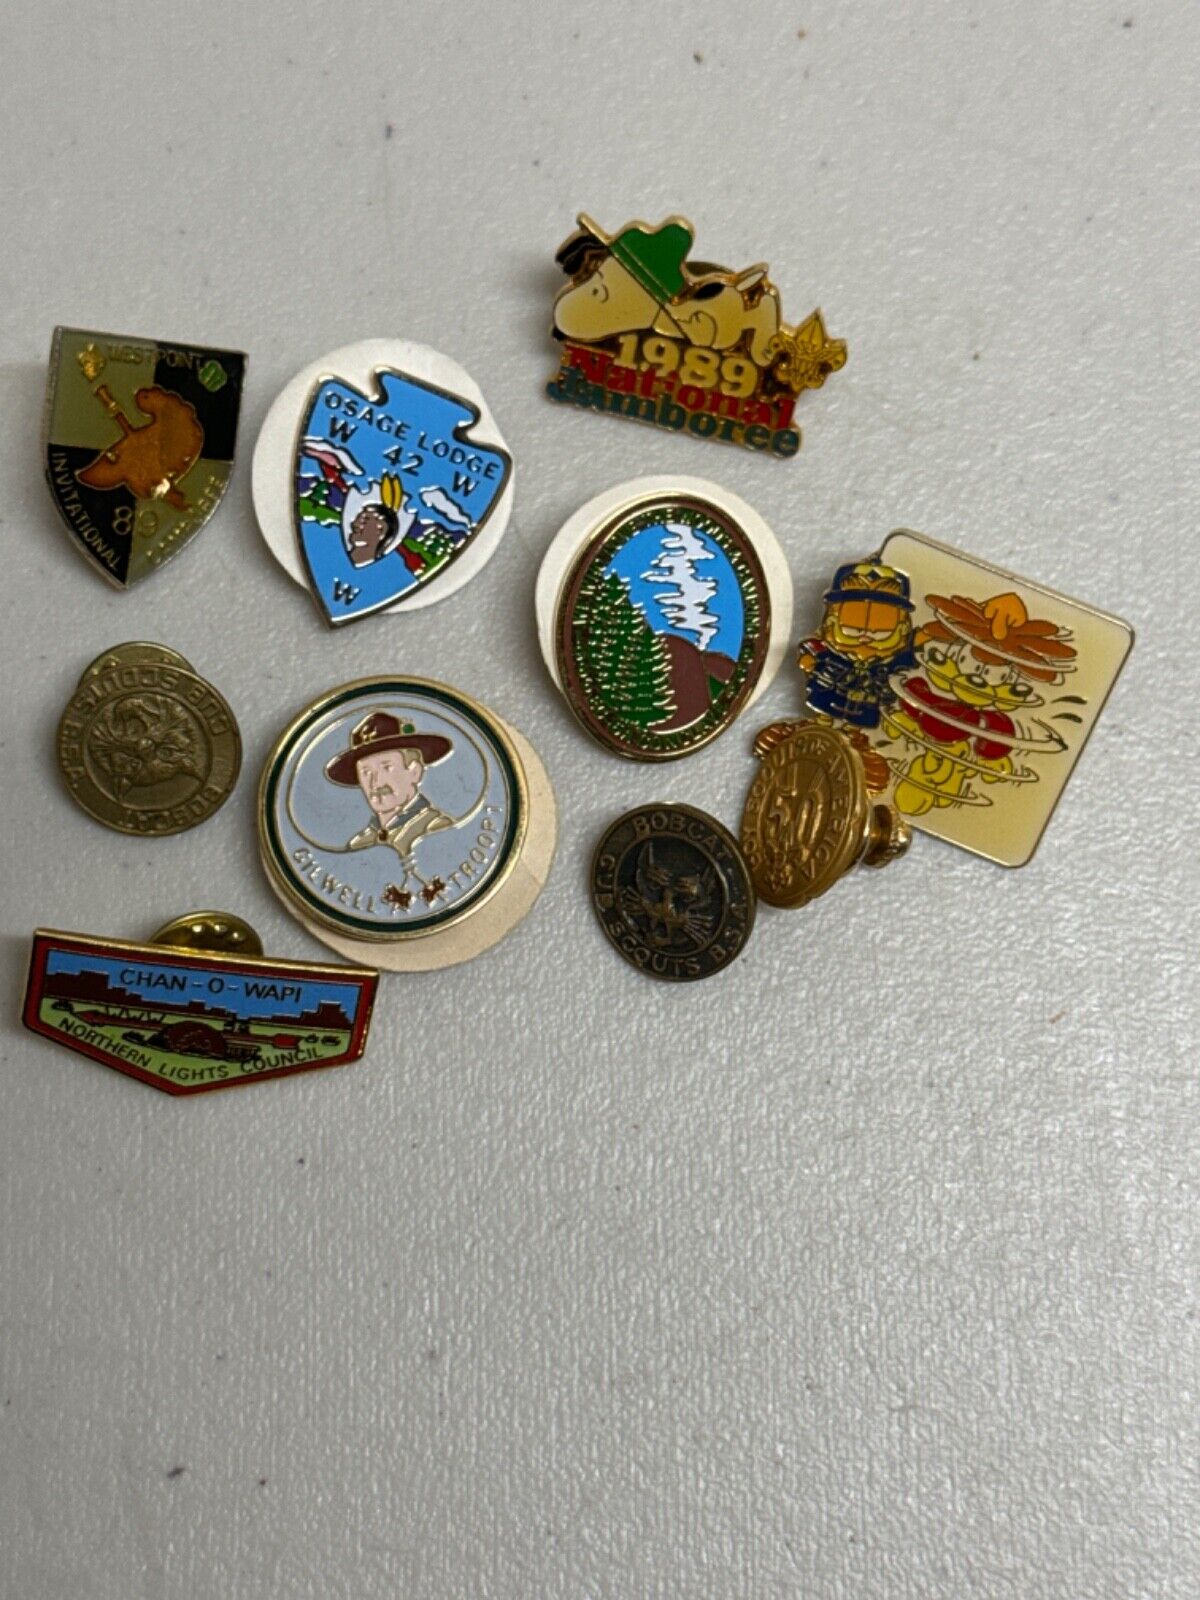 Boy Scout Pins mixed lot of 10 Lot #1